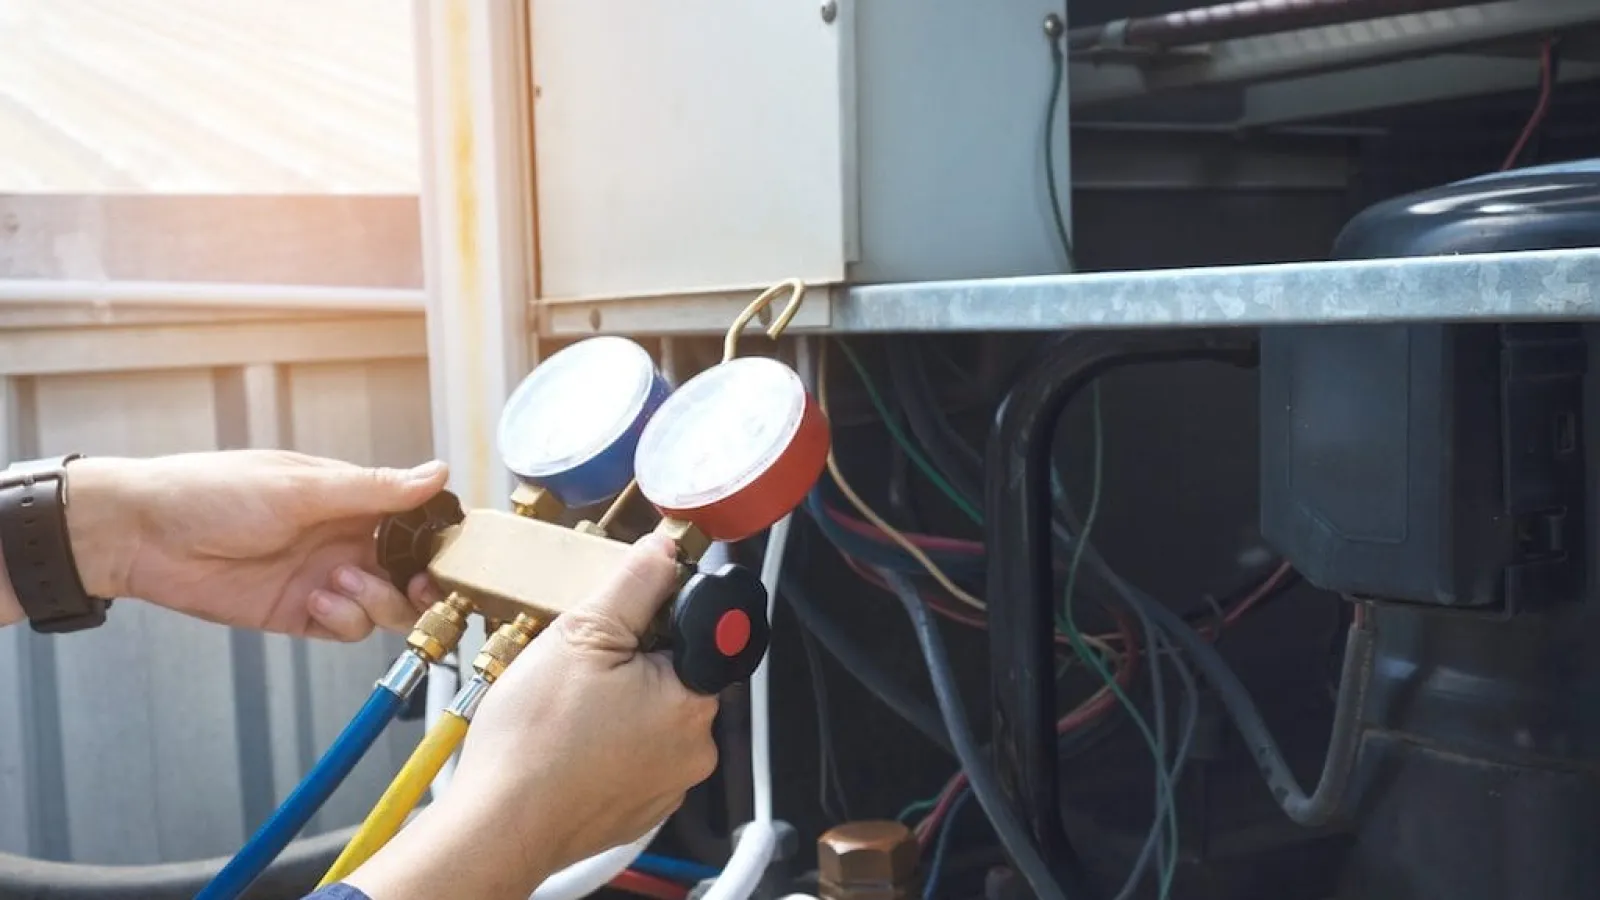 Air conditioning acting up? Know what to look for inside your HVAC system.